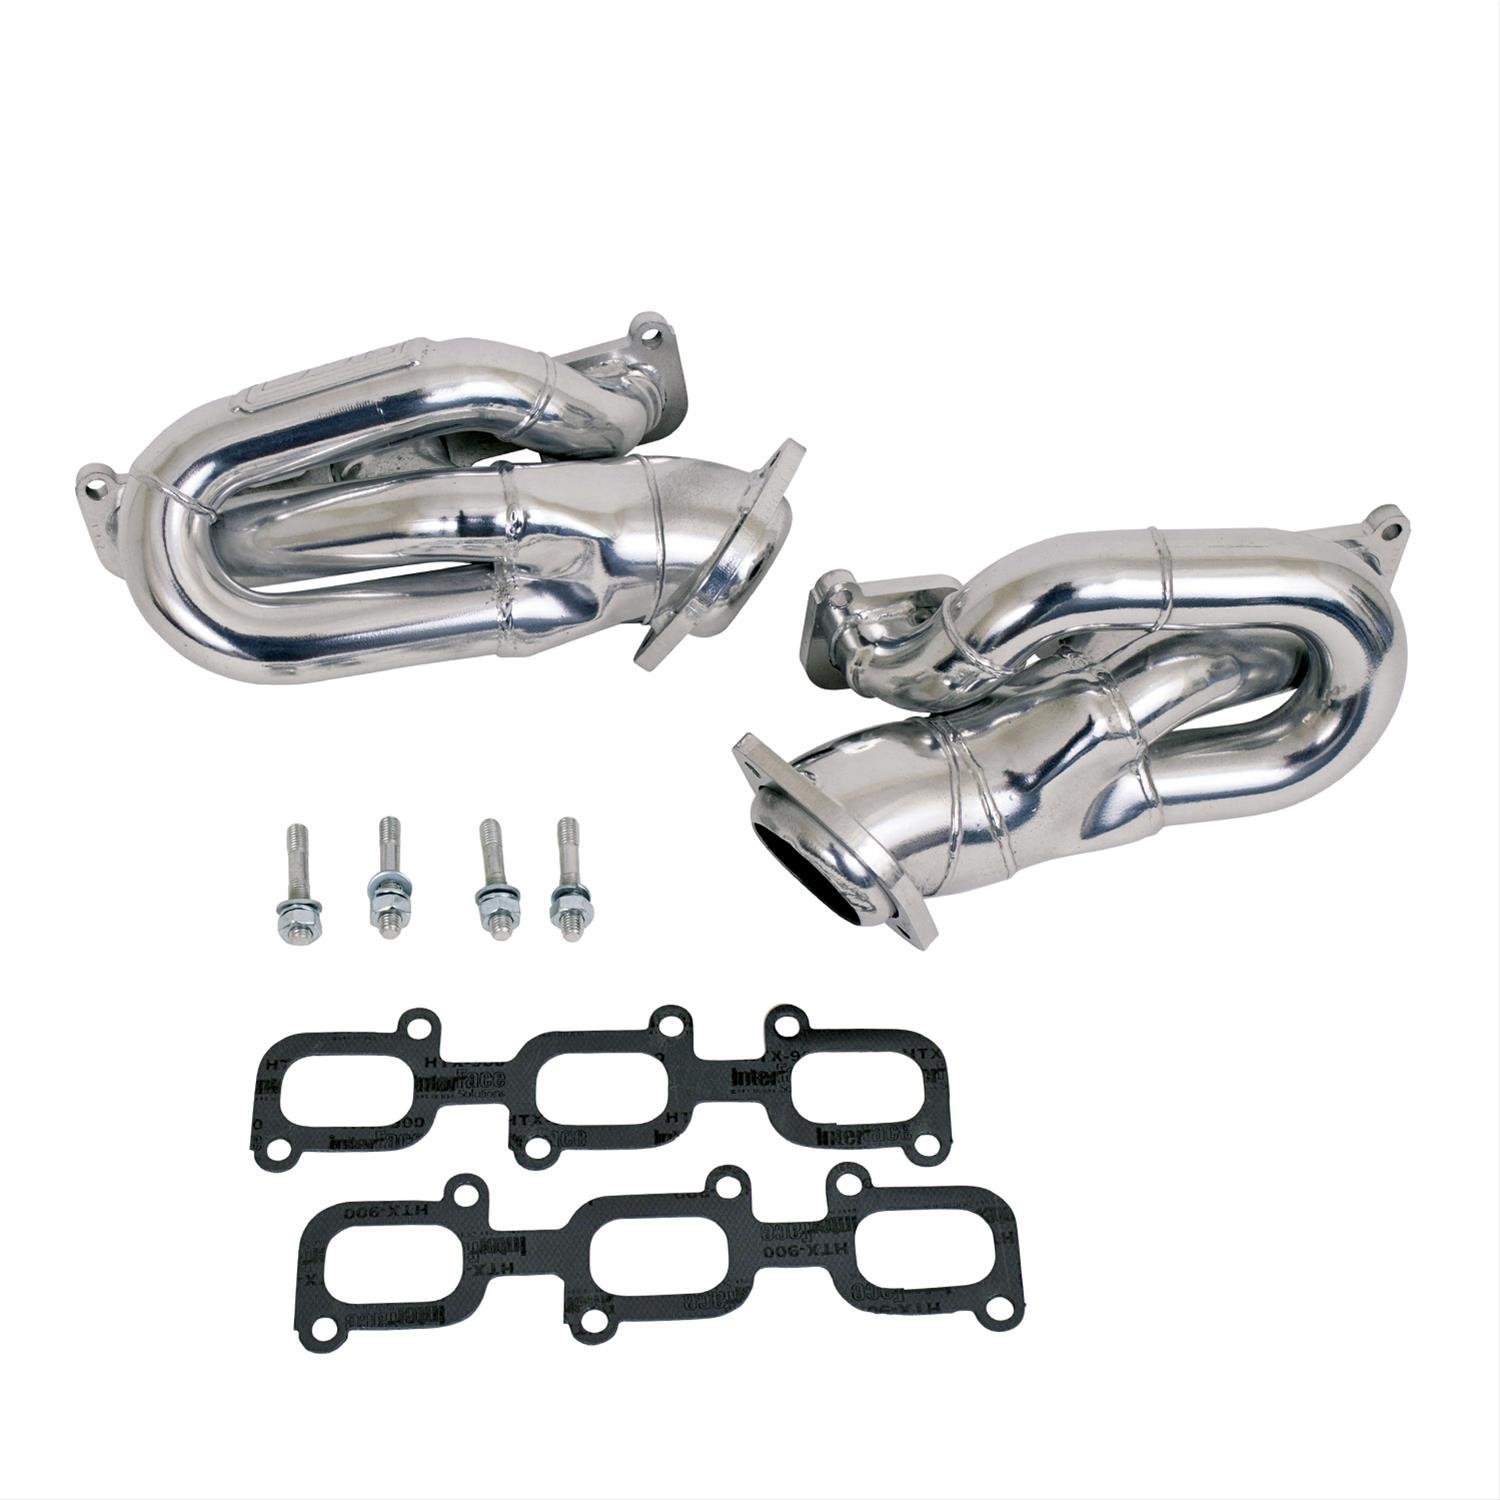 Tuned Length Shorty Headers 2011-2017 Ford Mustang 3.7L V6